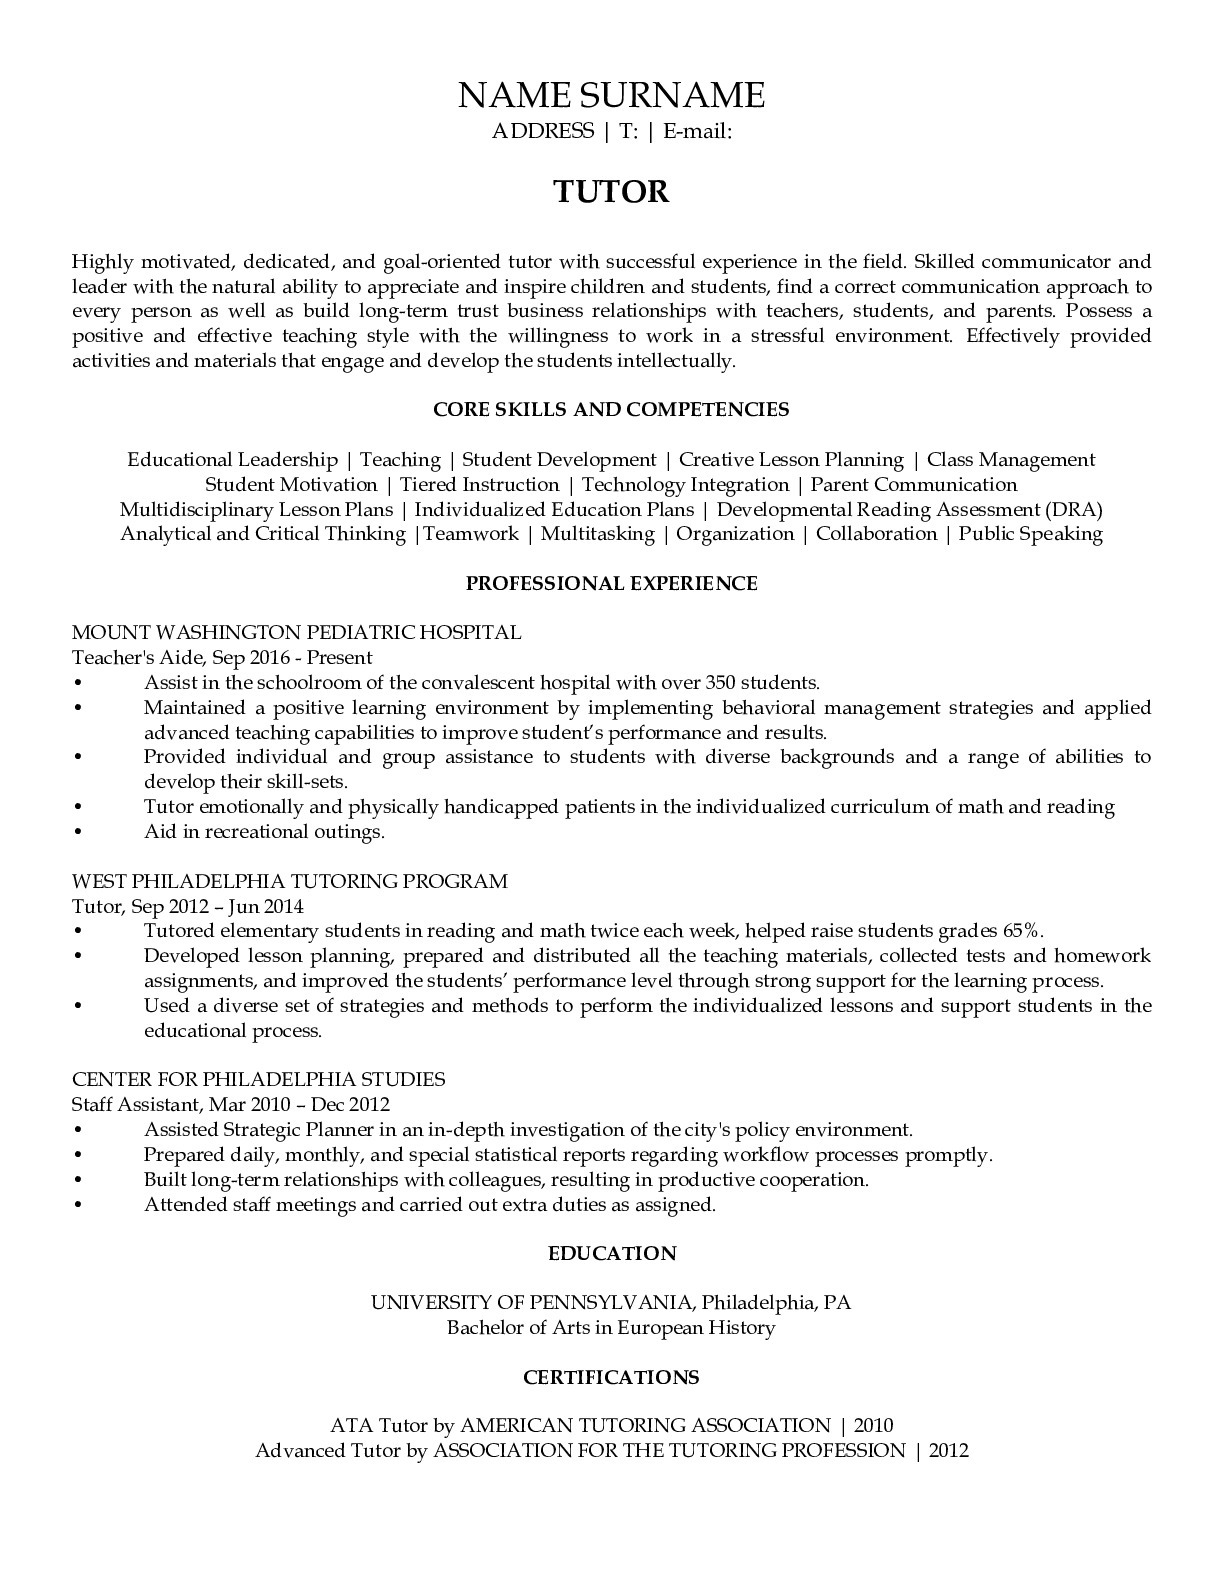 Resume Example for Tutor